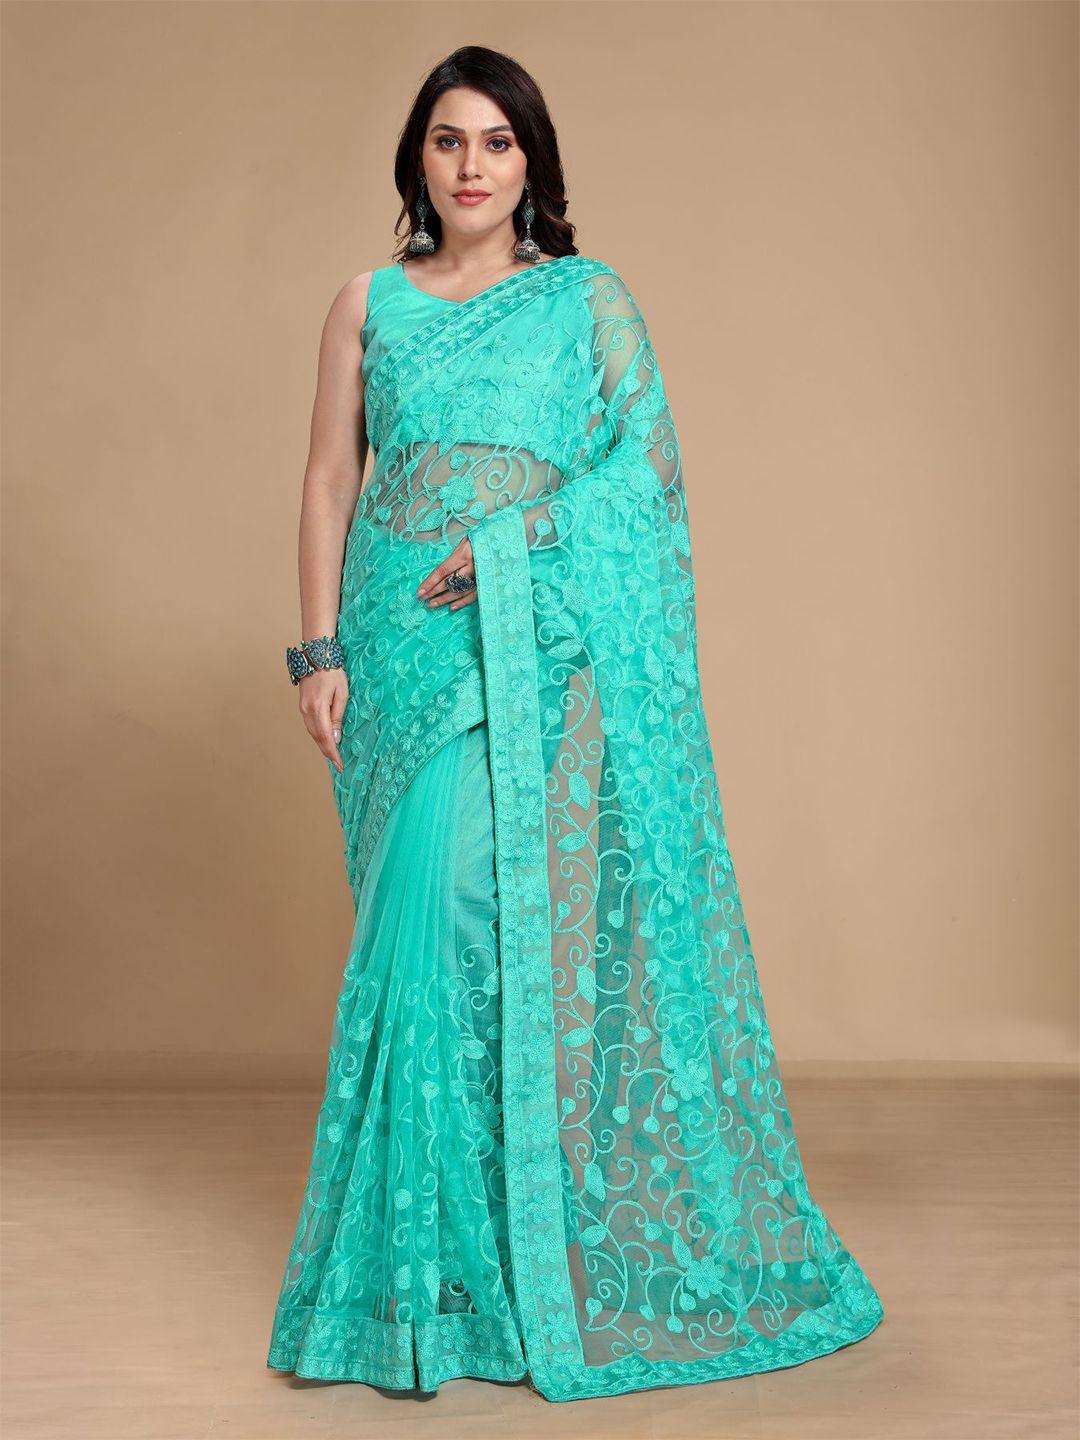 vairagee turquoise blue floral embroidered net saree